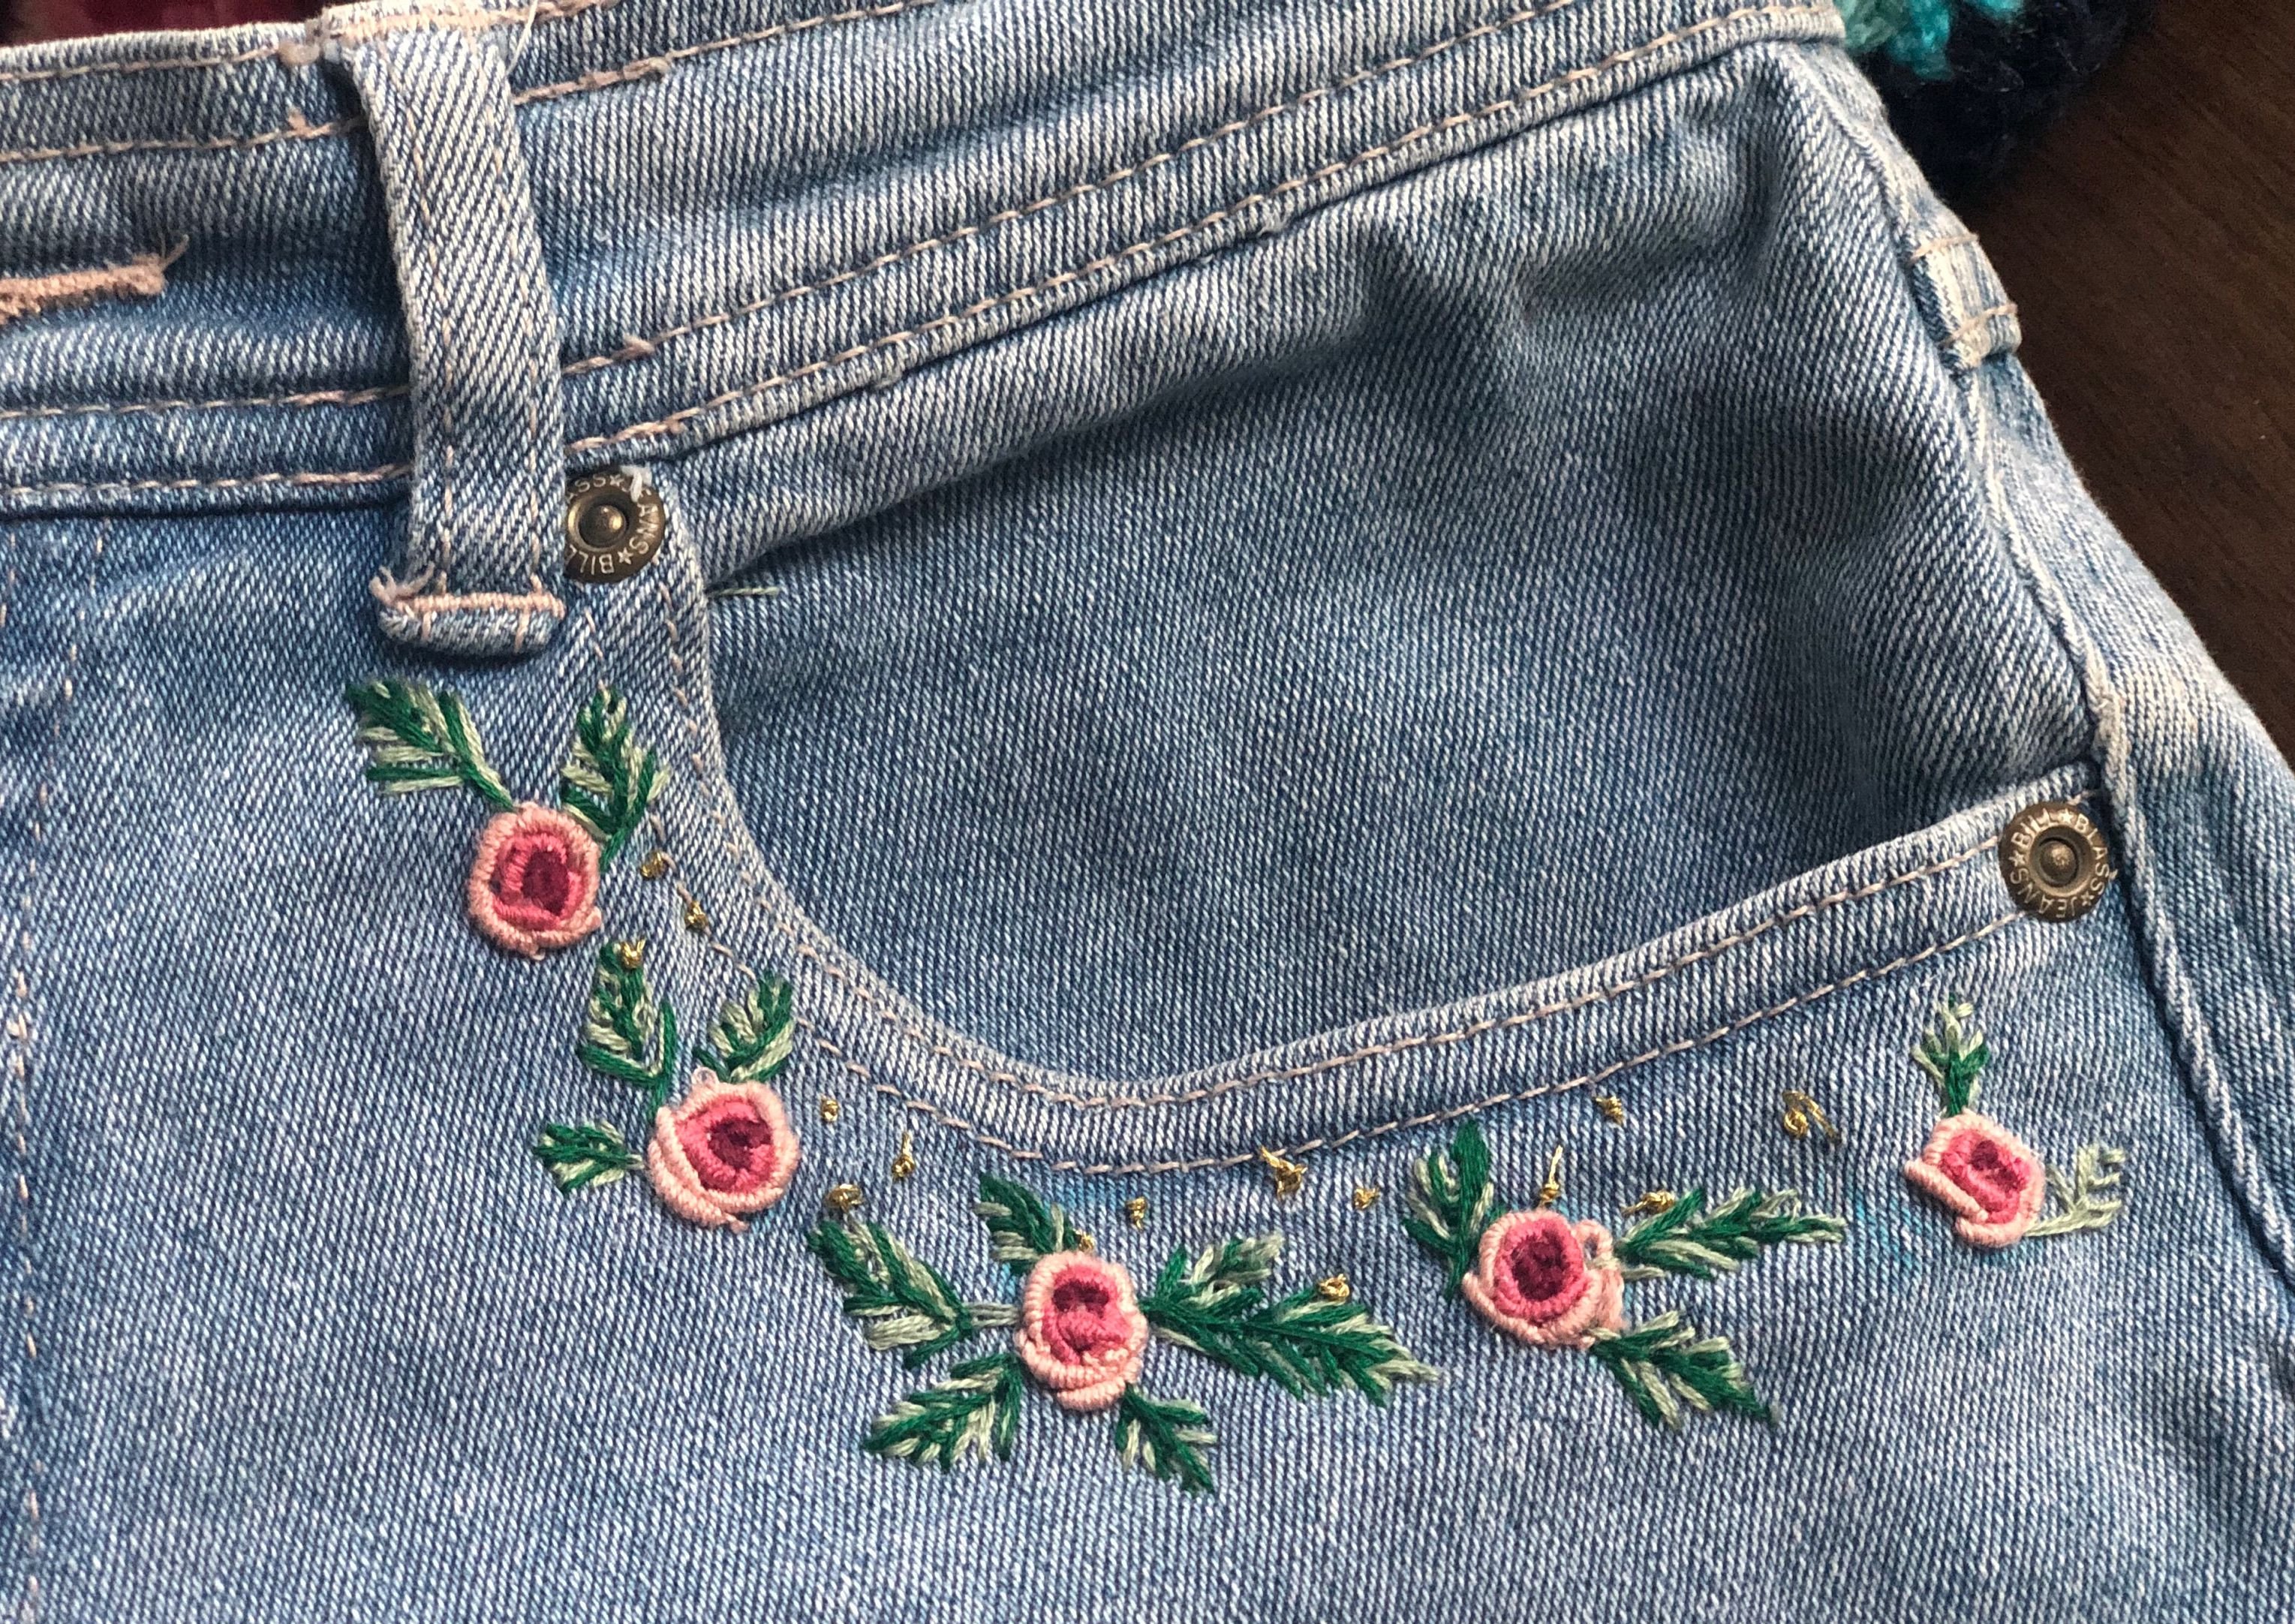 Embroidery Jeans  Embroidered clothes, Embroidery jeans, Jeans diy